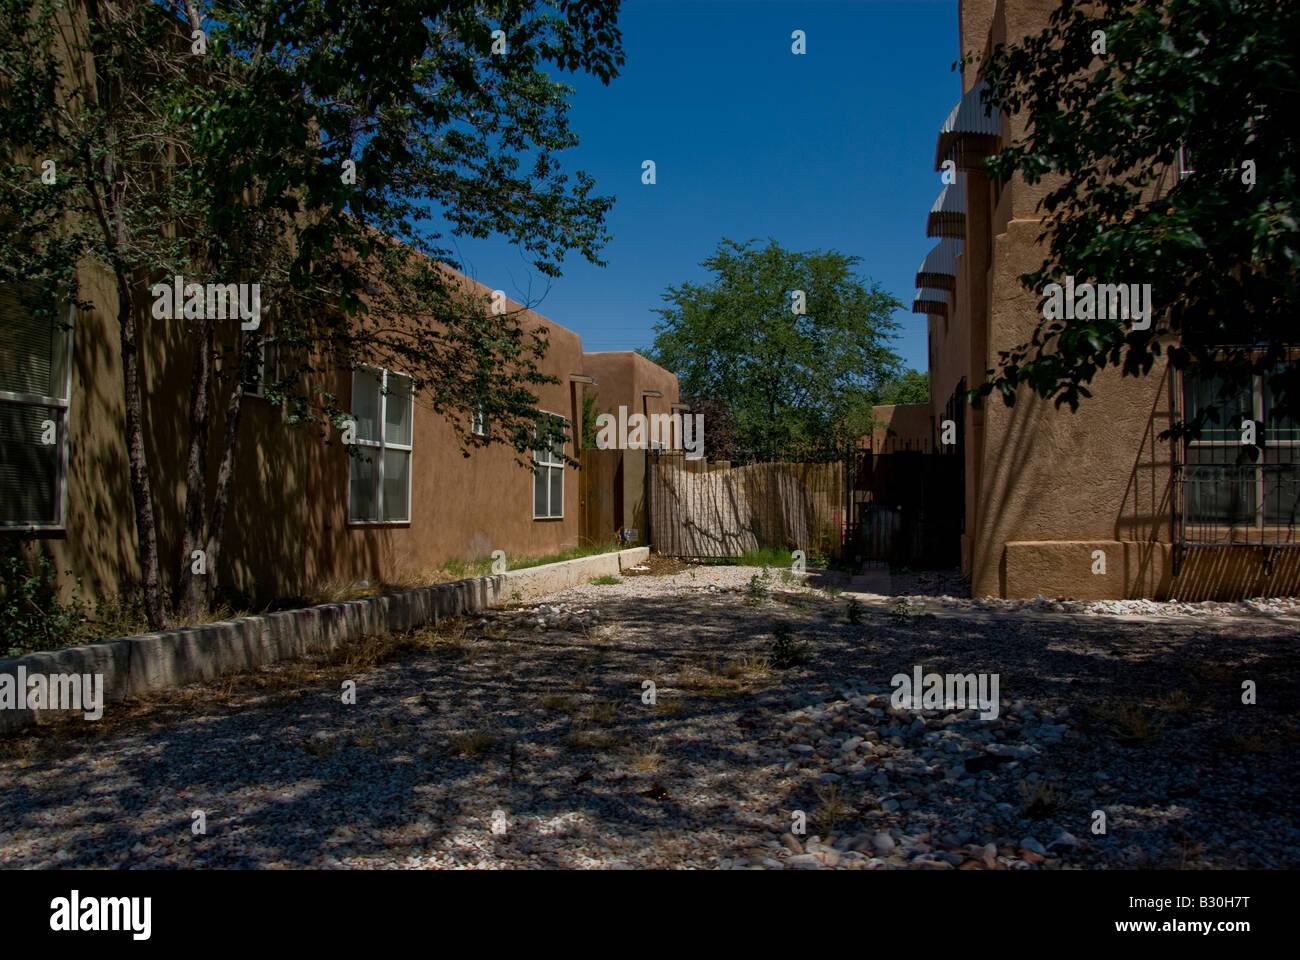 The plank fenced backyard of a residential house built in the Pueblo Revival Style in Albuquerque Stock Photo